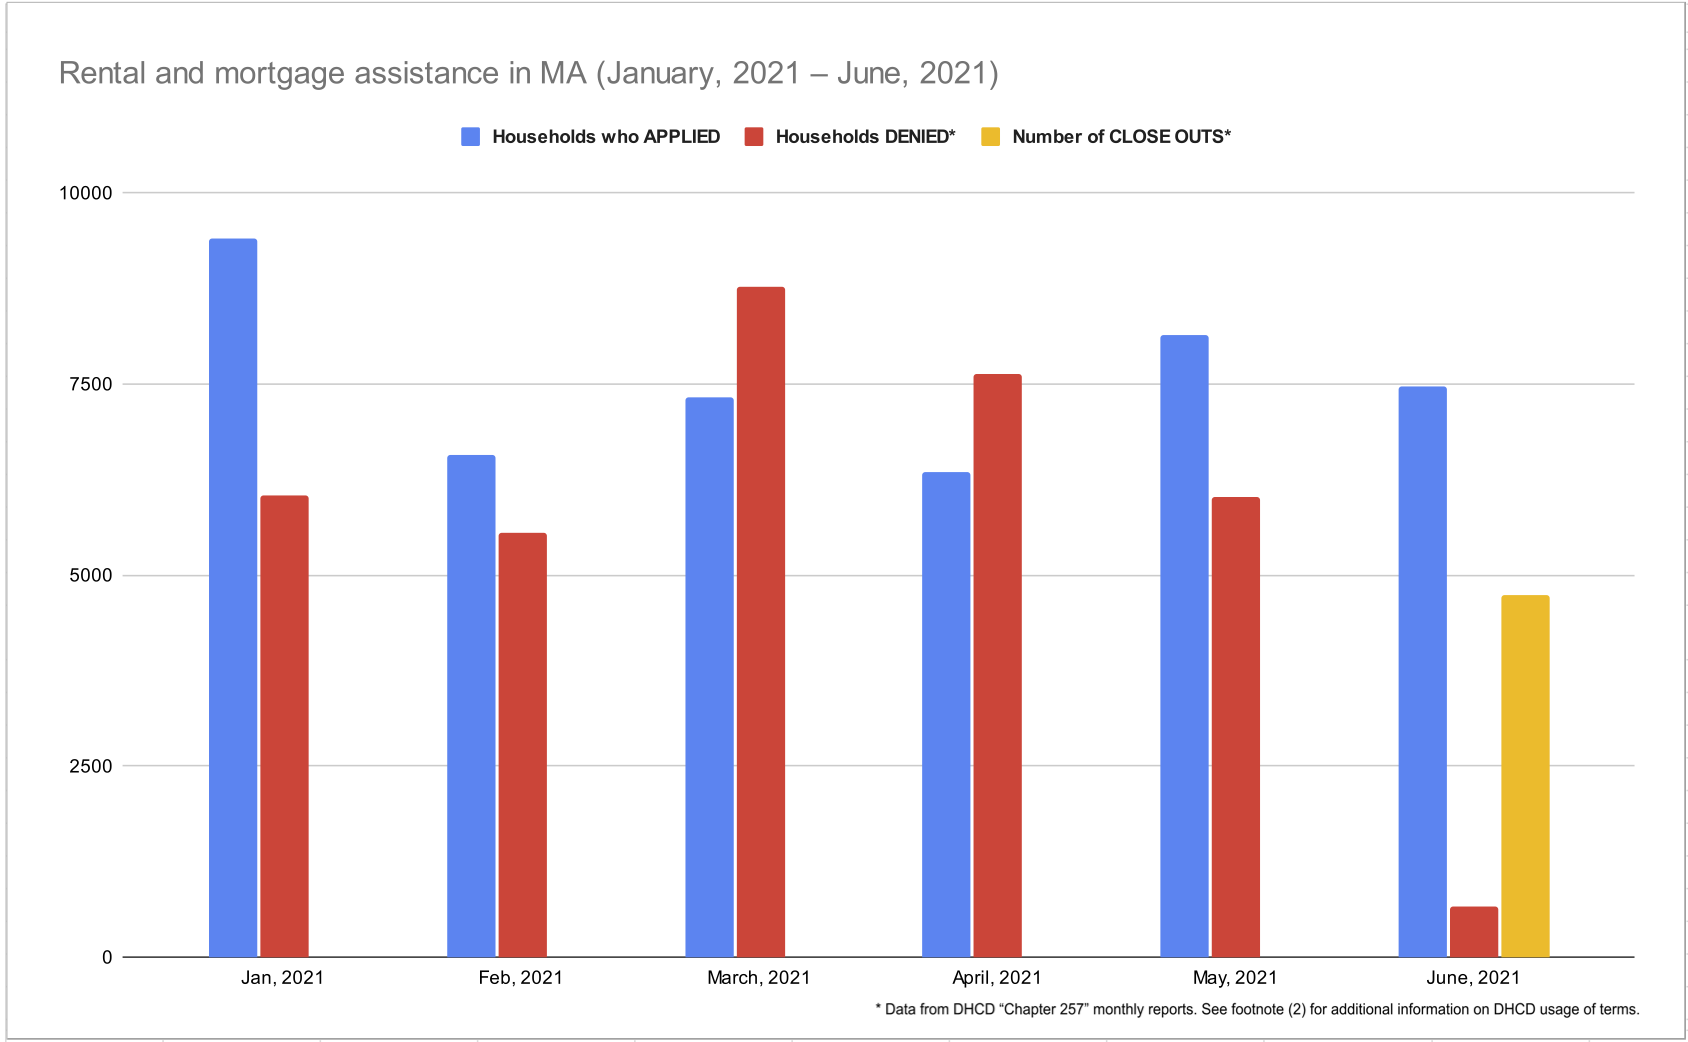 Bar graph showing number of rental and mortgage assistance applications made and number of applications denied per month in MA for January 2021 through May 2021, based on DHCD data and terminology